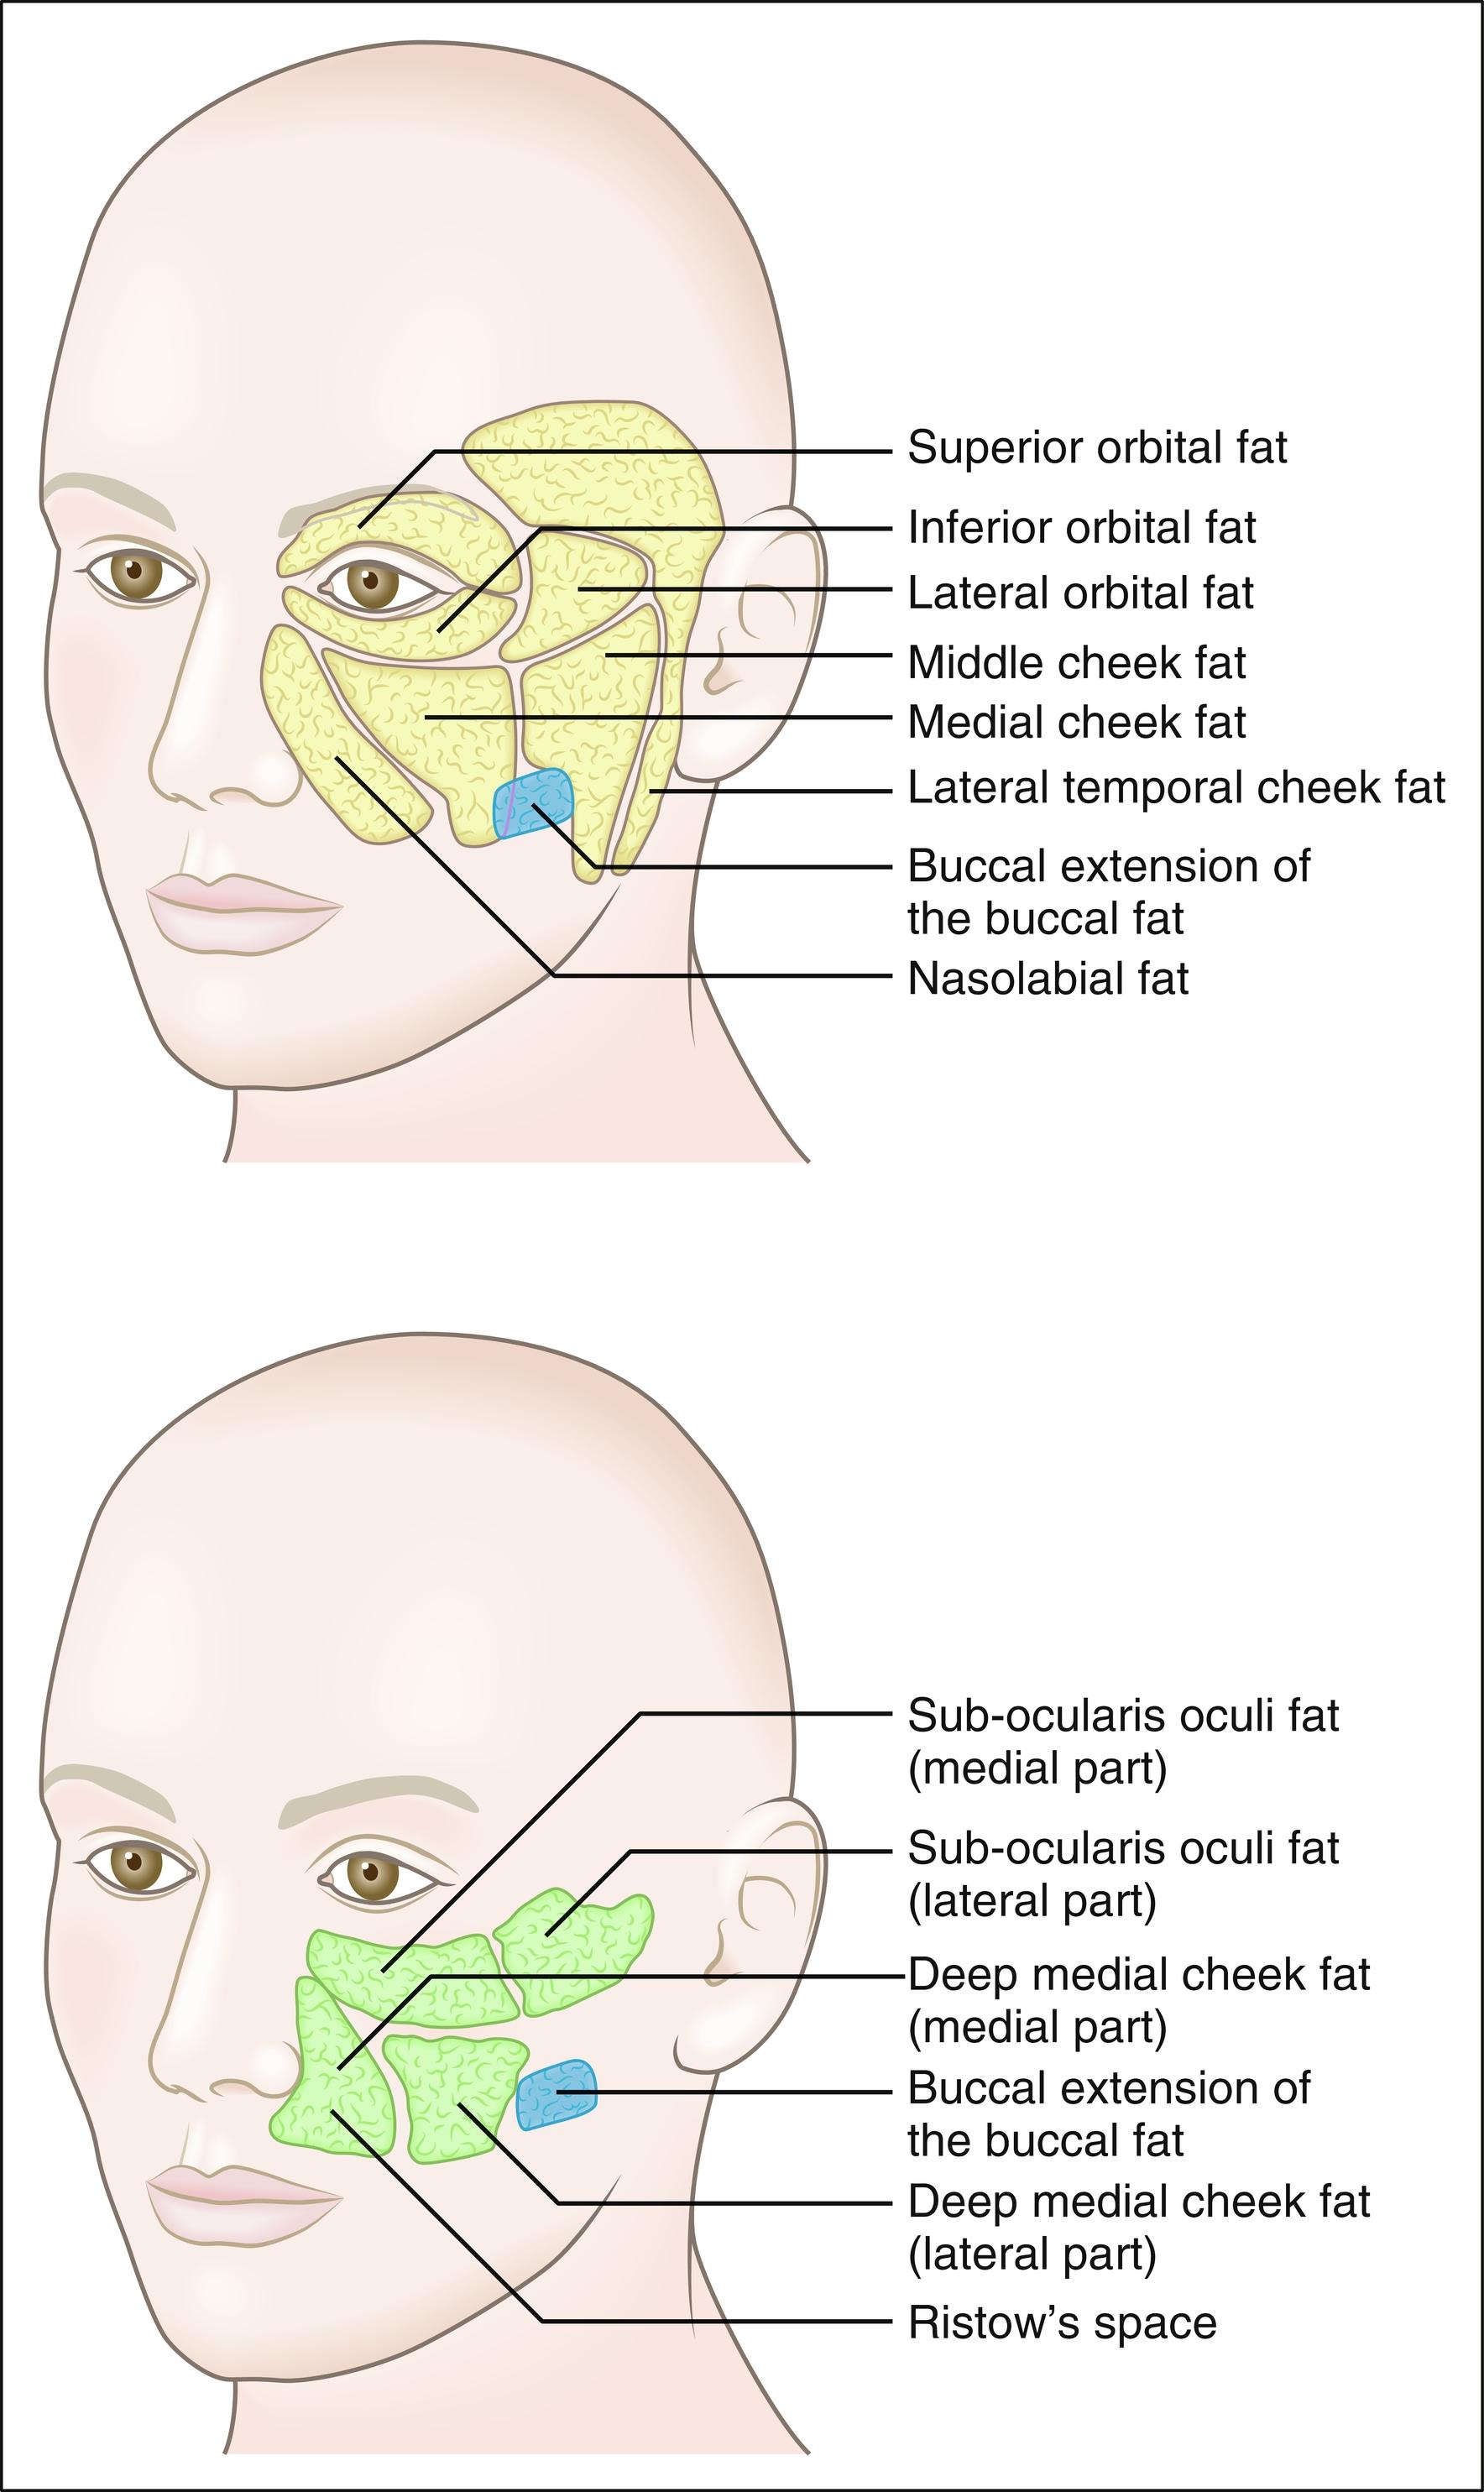 Fig. 10.6, Anatomical relationships of the superficial and deep facial fat compartments. The superficial layer (yellow) is composed of the nasolabial fat, the medial cheek fat, the middle cheek fat, the lateral temporal cheek compartment, and three orbital compartments. The deep midfacial fat compartments are composed of the sub-orbicularis oculi fat (medial and lateral parts) and the deep medial cheek fat (medial and lateral parts). Three layers of distinct fat compartments are found laterally to the pyriform aperture, where a deep compartment (blue) is located posterior to the medial part of the deep medial cheek fat. The buccal extension of the buccal fat pad extends from the paramaxillary space to the subcutaneous plane.